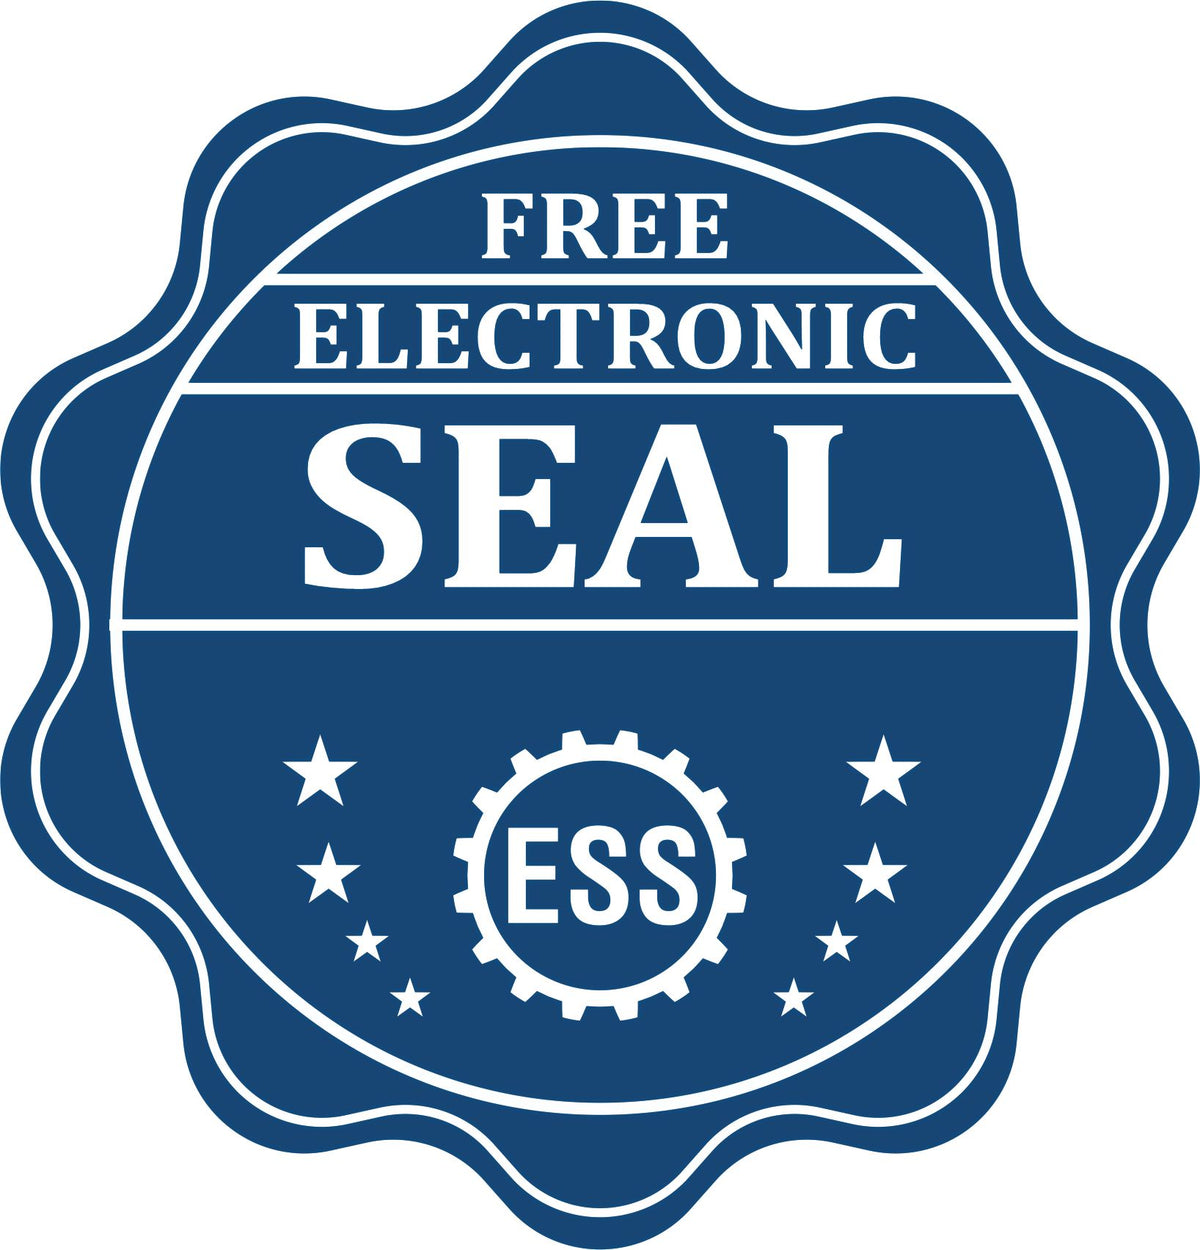 A badge showing a free electronic seal for the Handheld Iowa Land Surveyor Seal with stars and the ESS gear on the emblem.